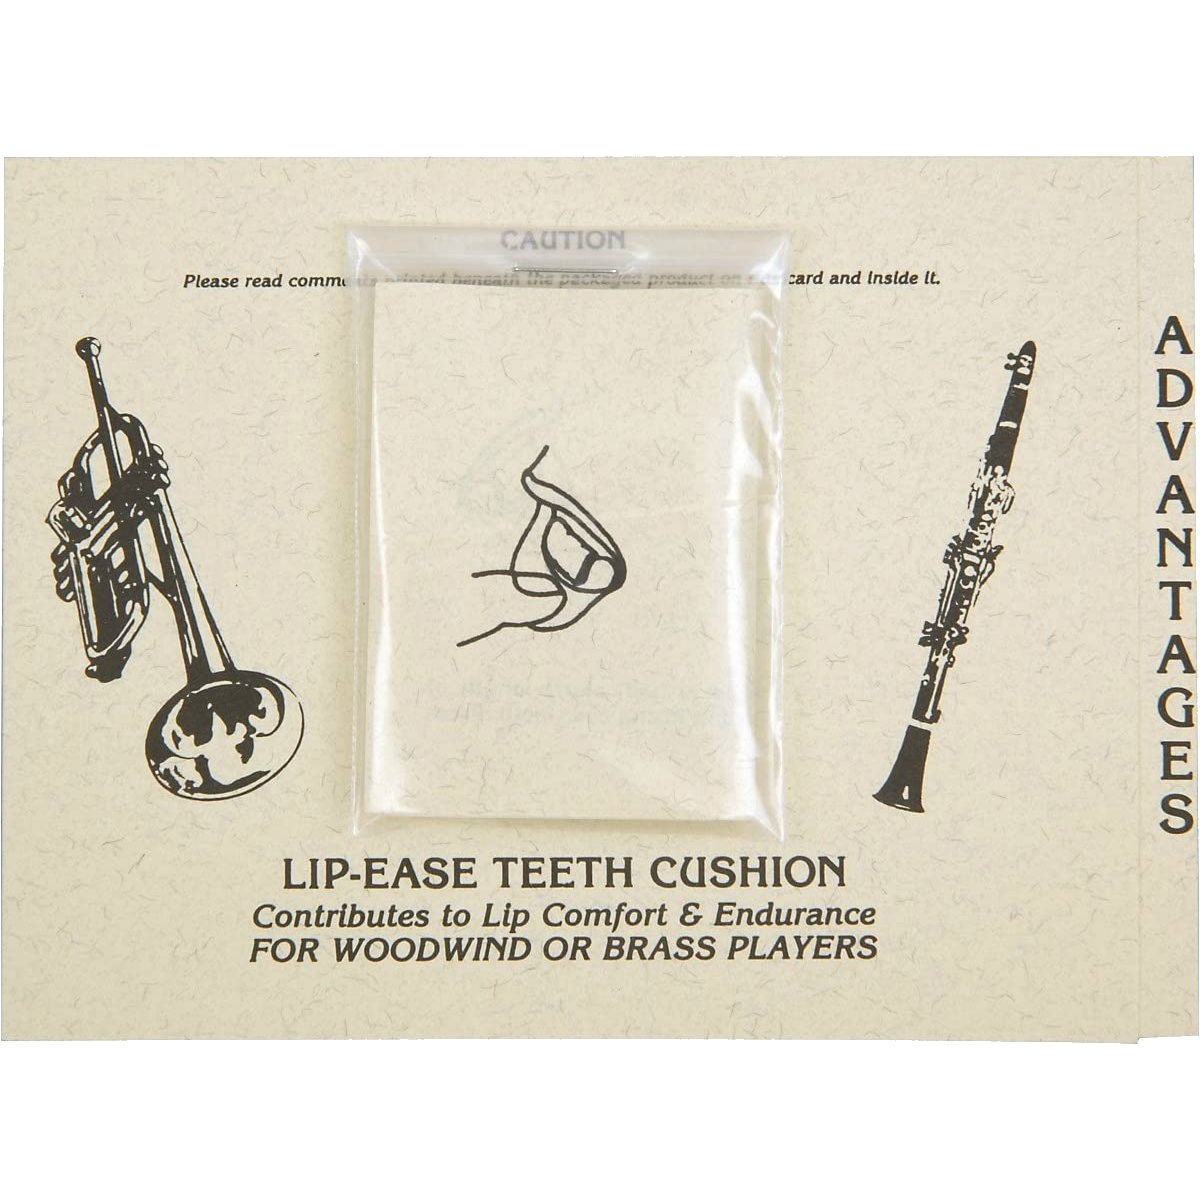 Lip-Ease Teeth Cushion by Bay Woodwinds Products